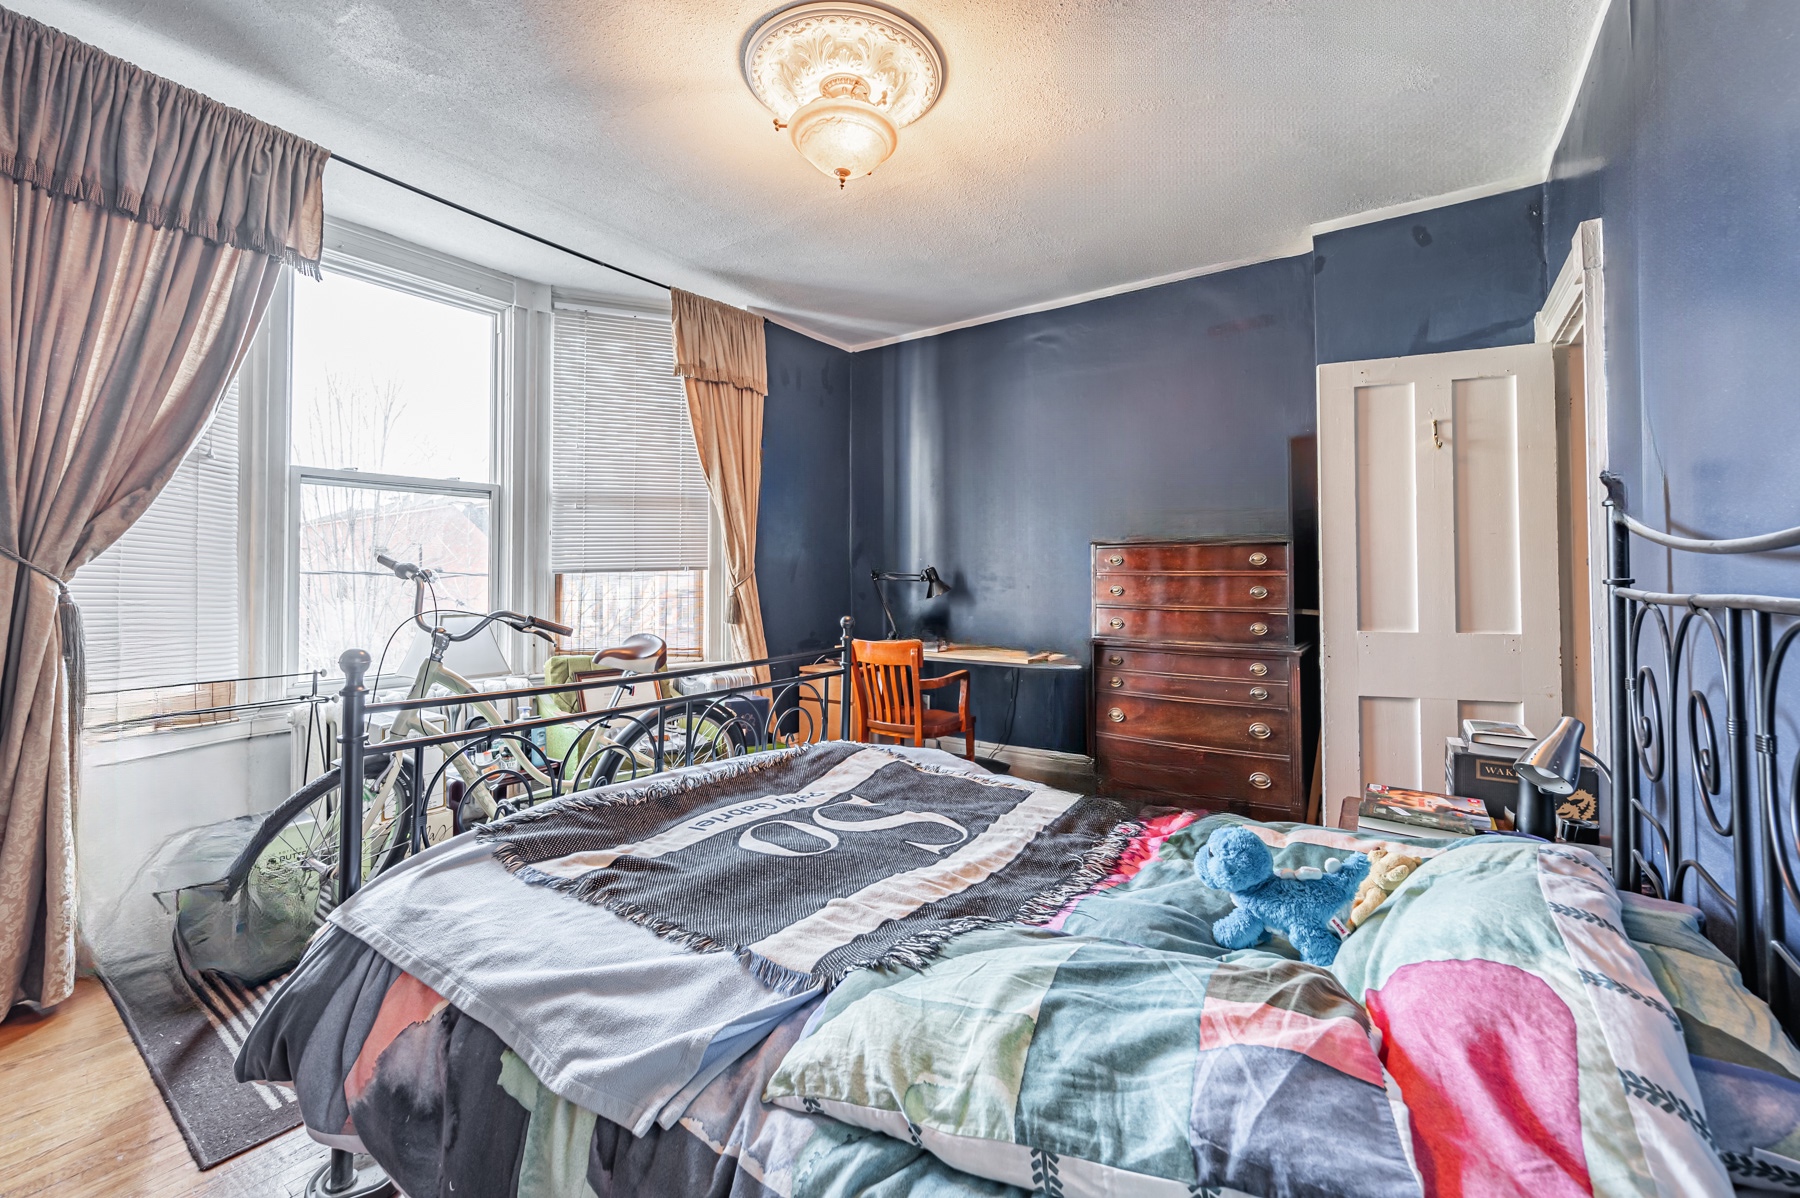 Large primary bedroom with bay windows and blue walls – 74 Homewood Ave.